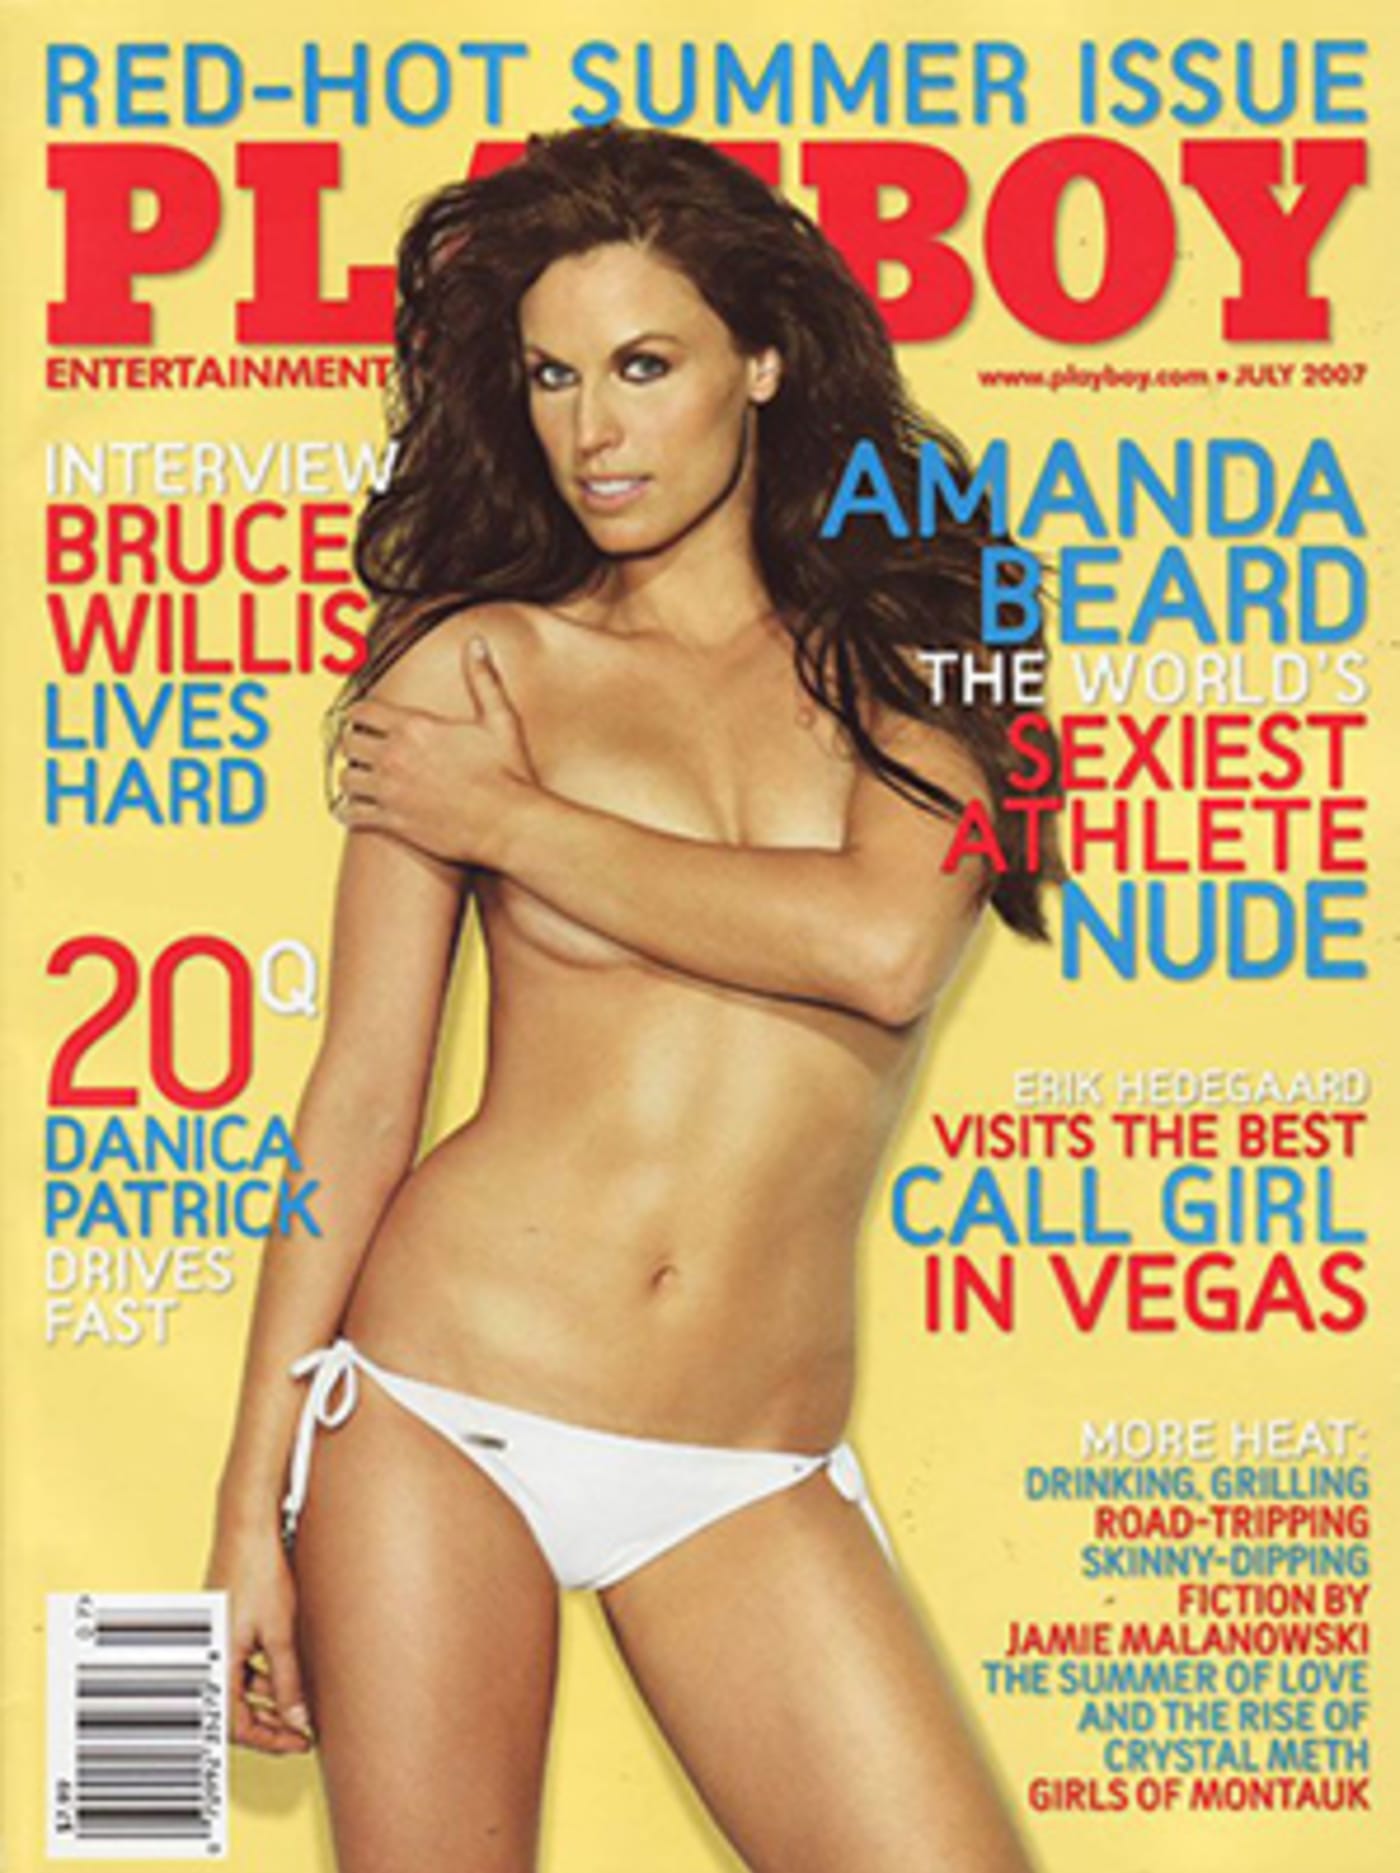 Playboy Porn Movie Male Actors - Playboy Nudes By The Hottest Celebrities: 50 Celebrities Who Posed Naked  For The Magazine | Complex